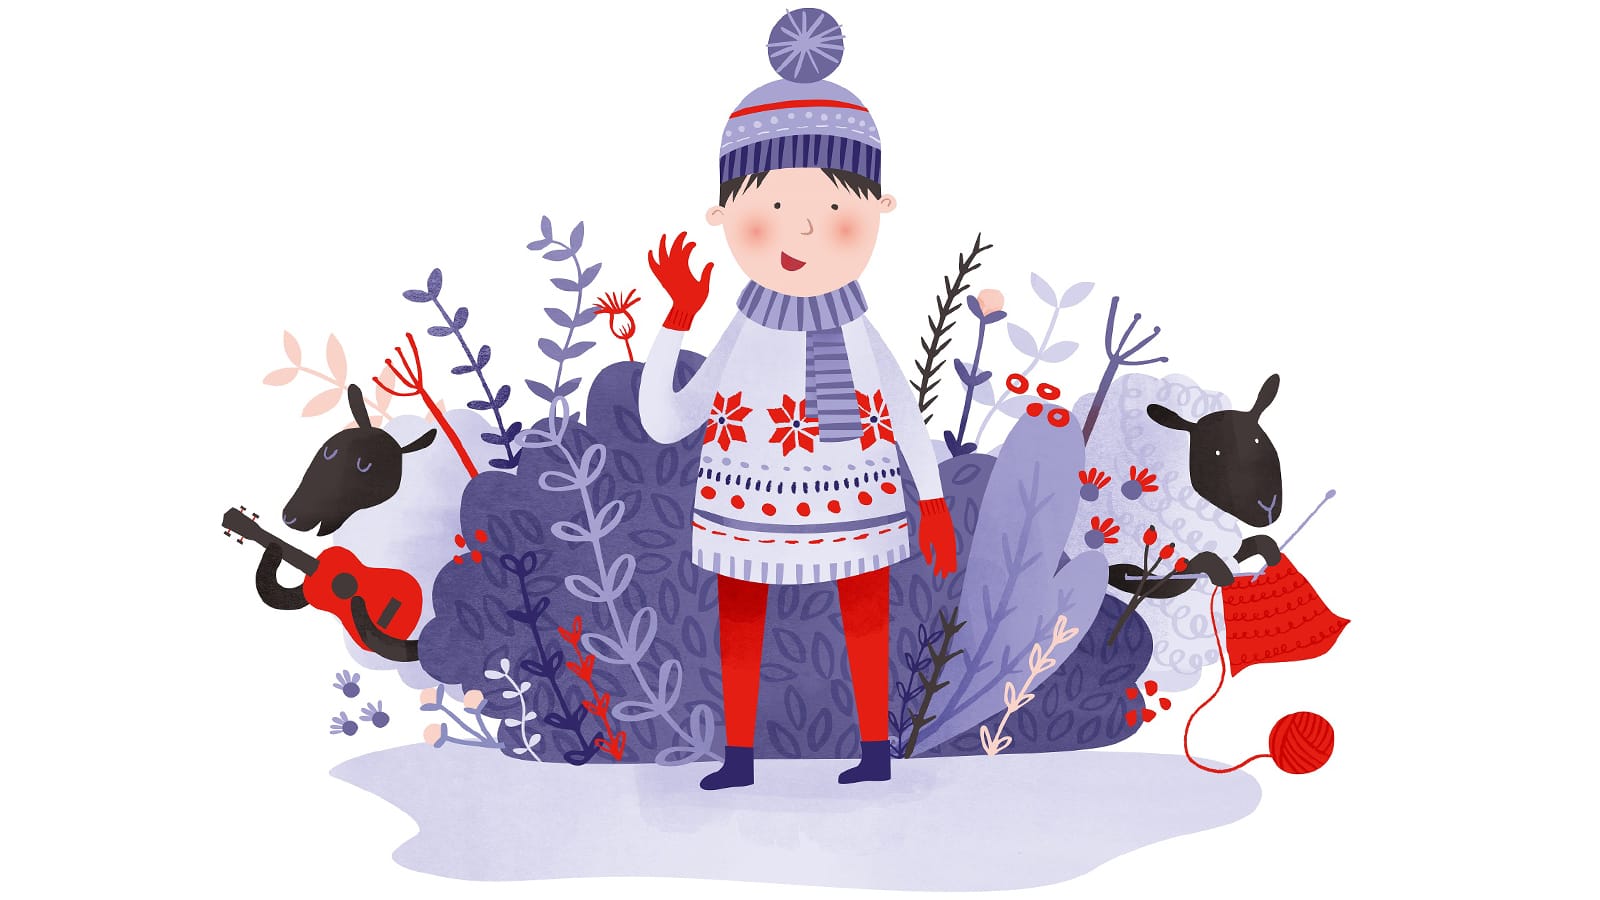 An illustration of a young boy with a woolly hat and surrounded by sheep